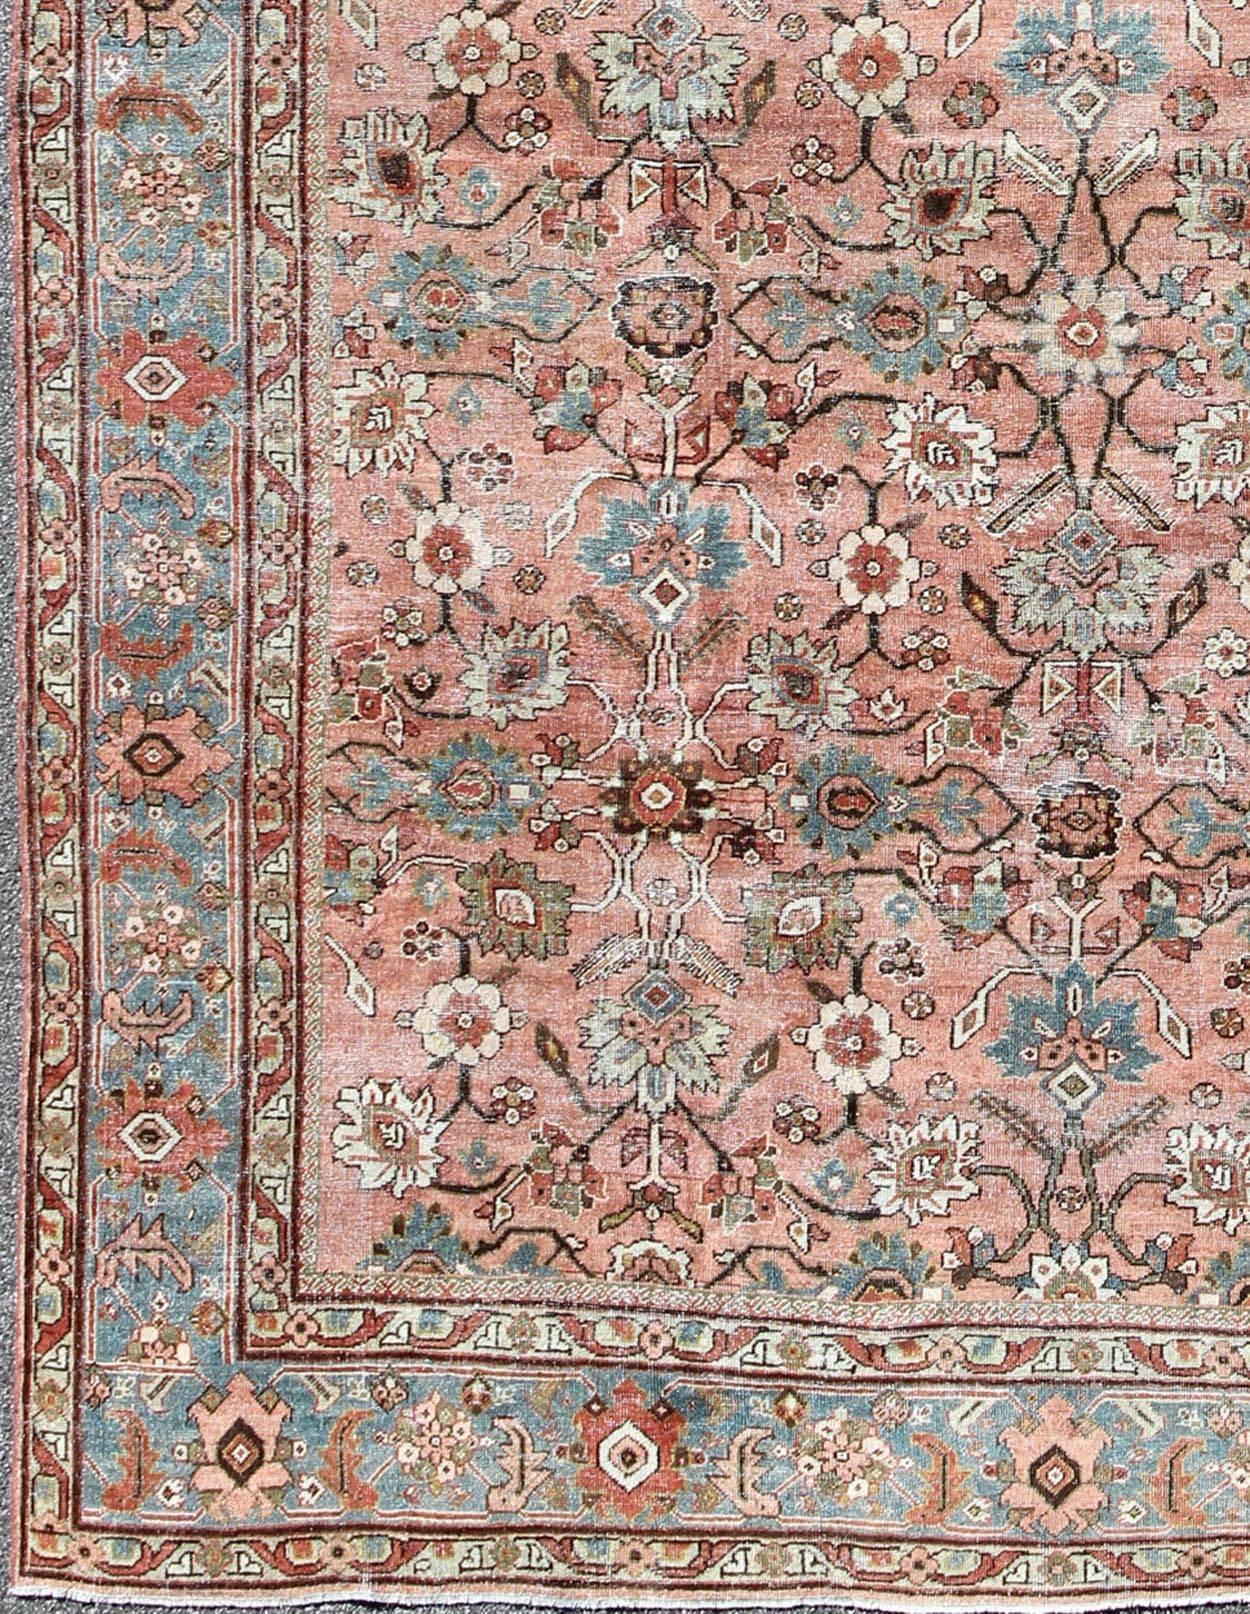 Antique sub-geometric Persian distressed Sultanabad rug with burnt orange field, blue Border, rug gld-4777, country of origin / type: Iran / Sultanabad, circa 1910

This beautiful and large early 20th century antique Persian Sultanabad rug